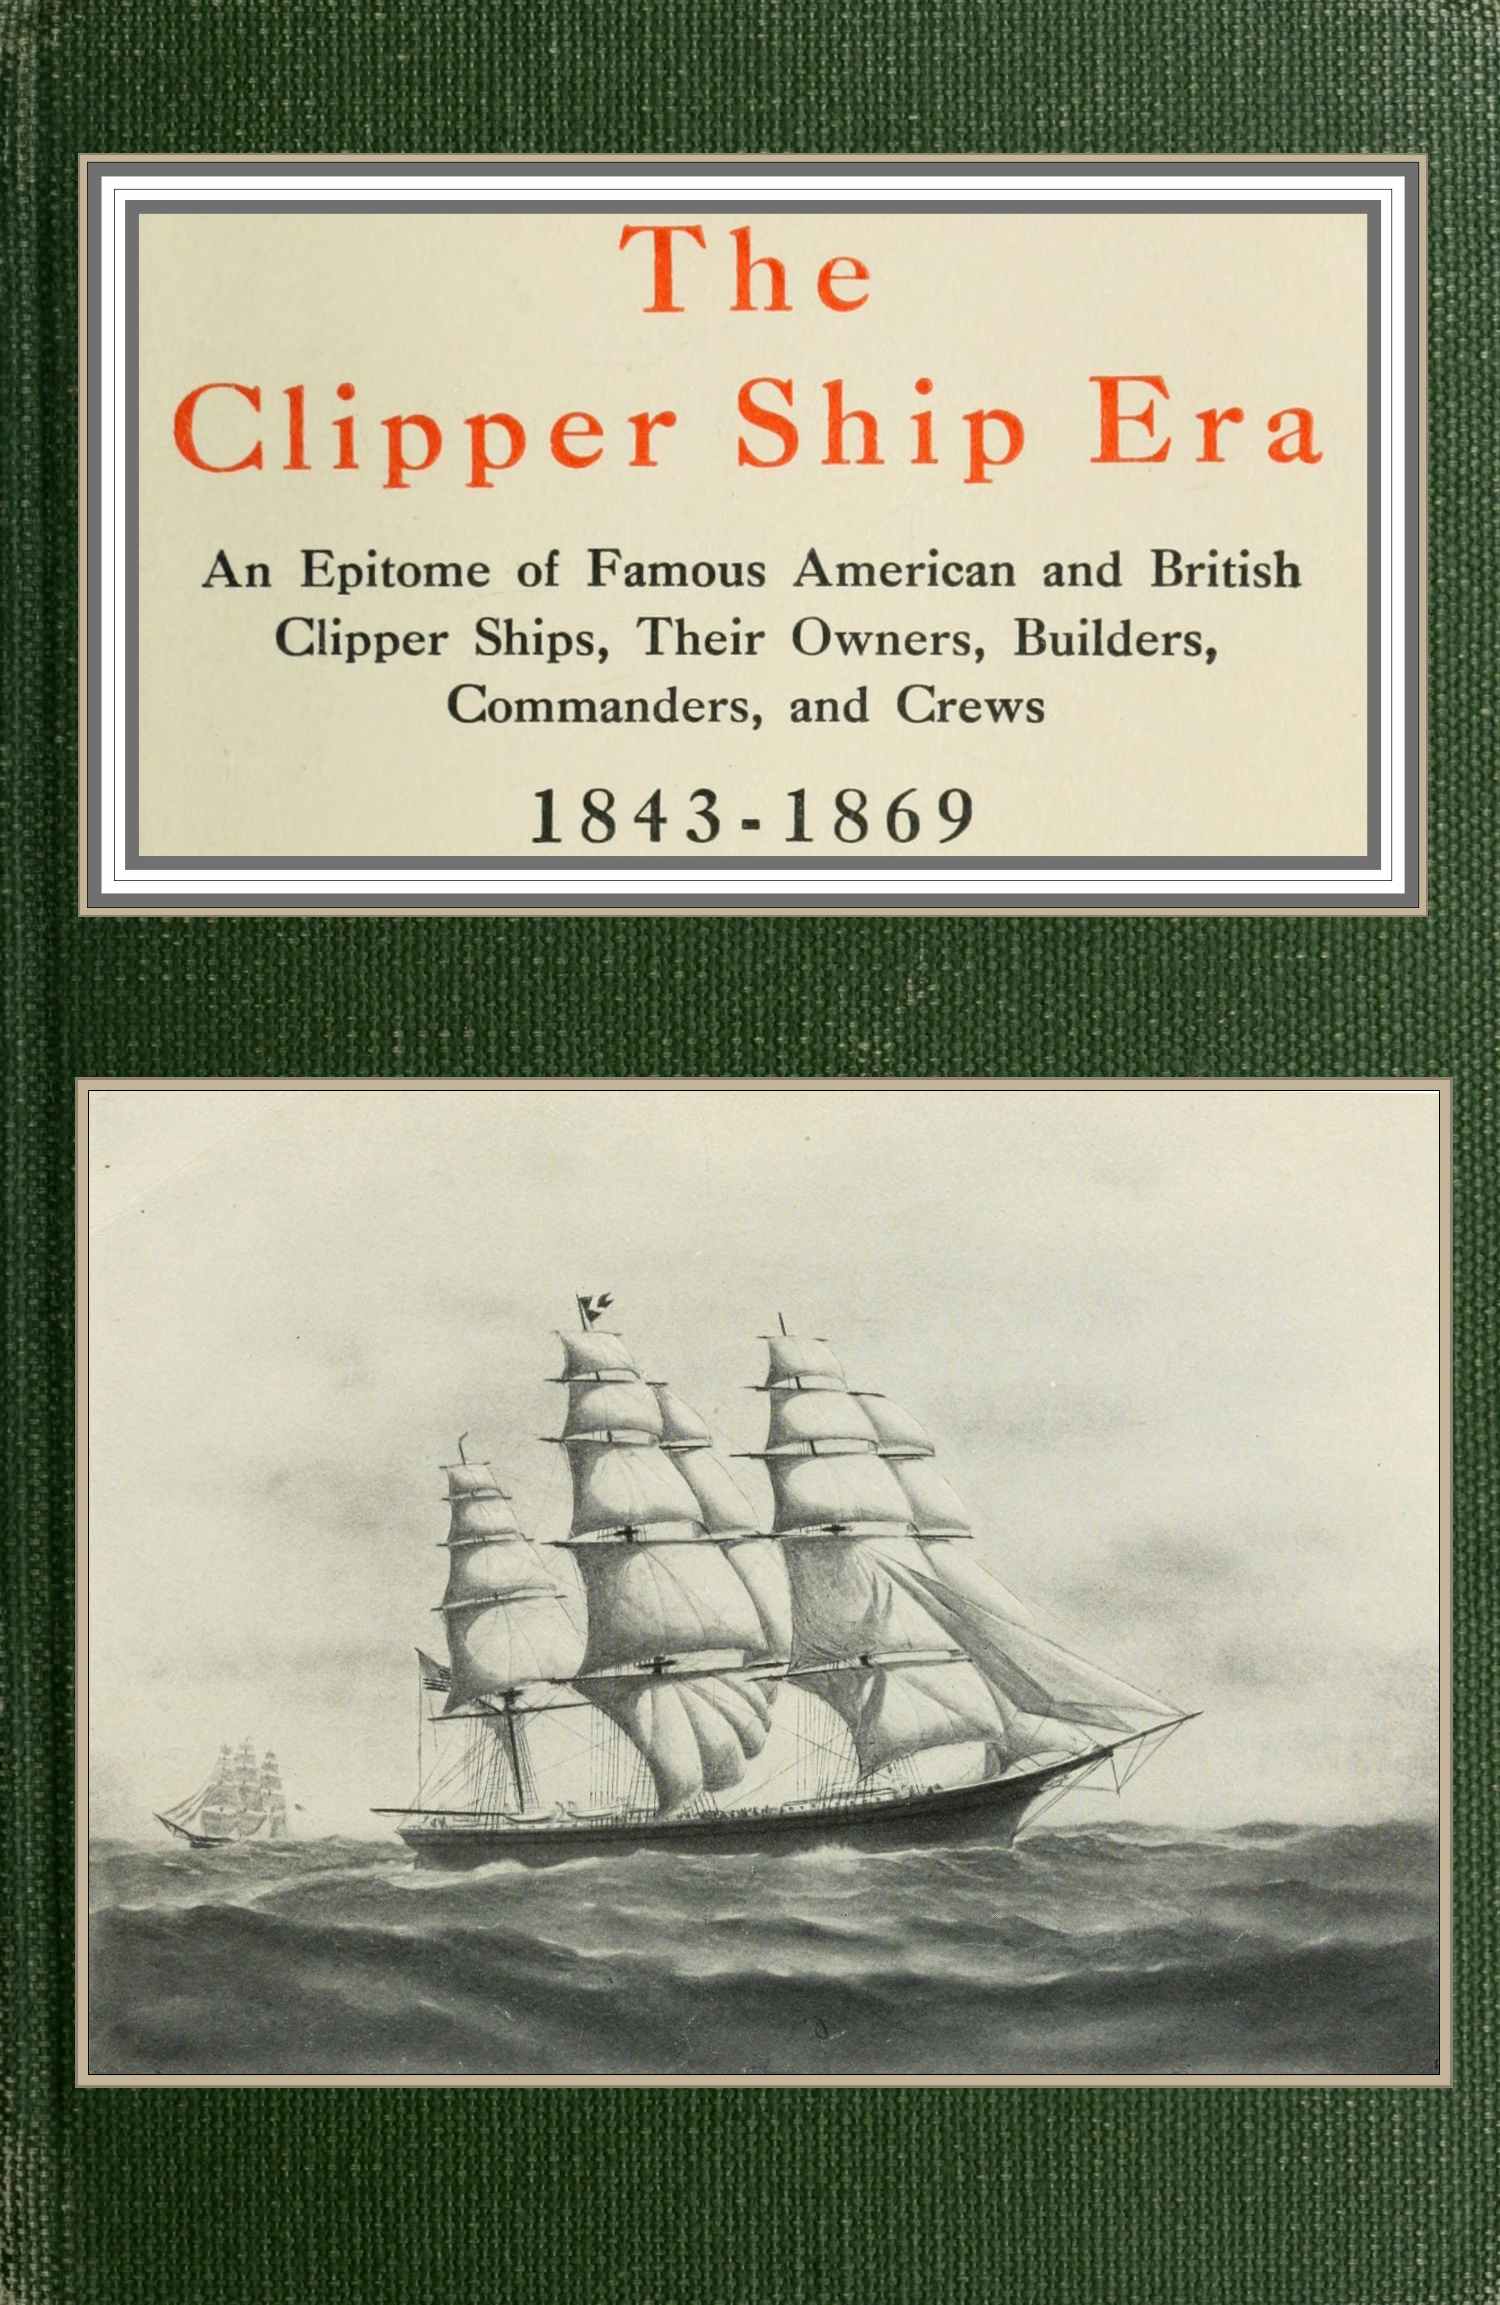 The clipper ship era&#10;an epitome of famous American and British clipper ships, their owners, builders, commanders, and crews, 1843-1869